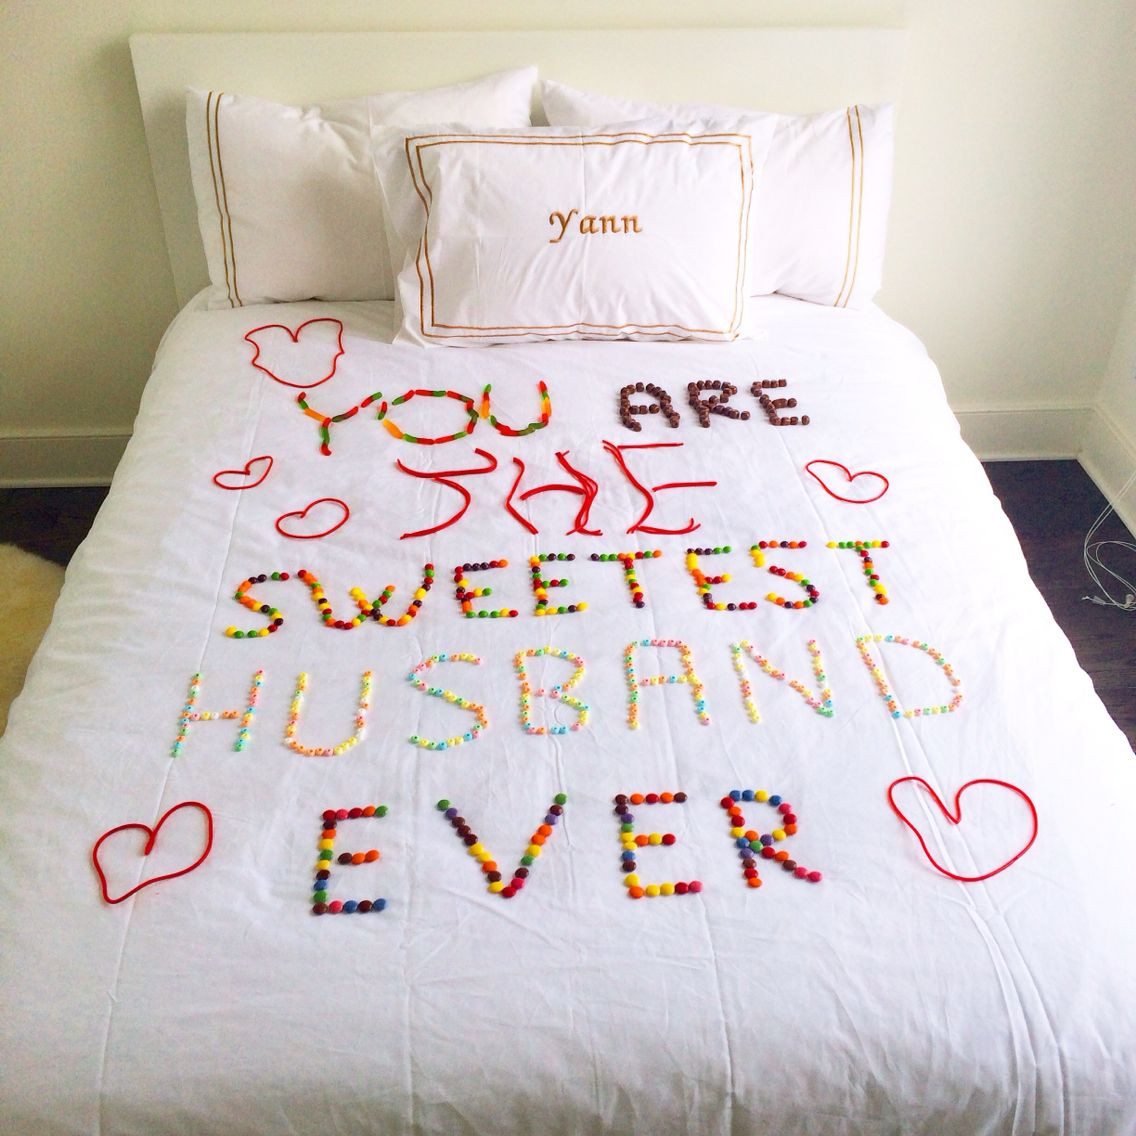 24 Ideas for Romantic Birthday Gifts for Husband - Home, Family, Style